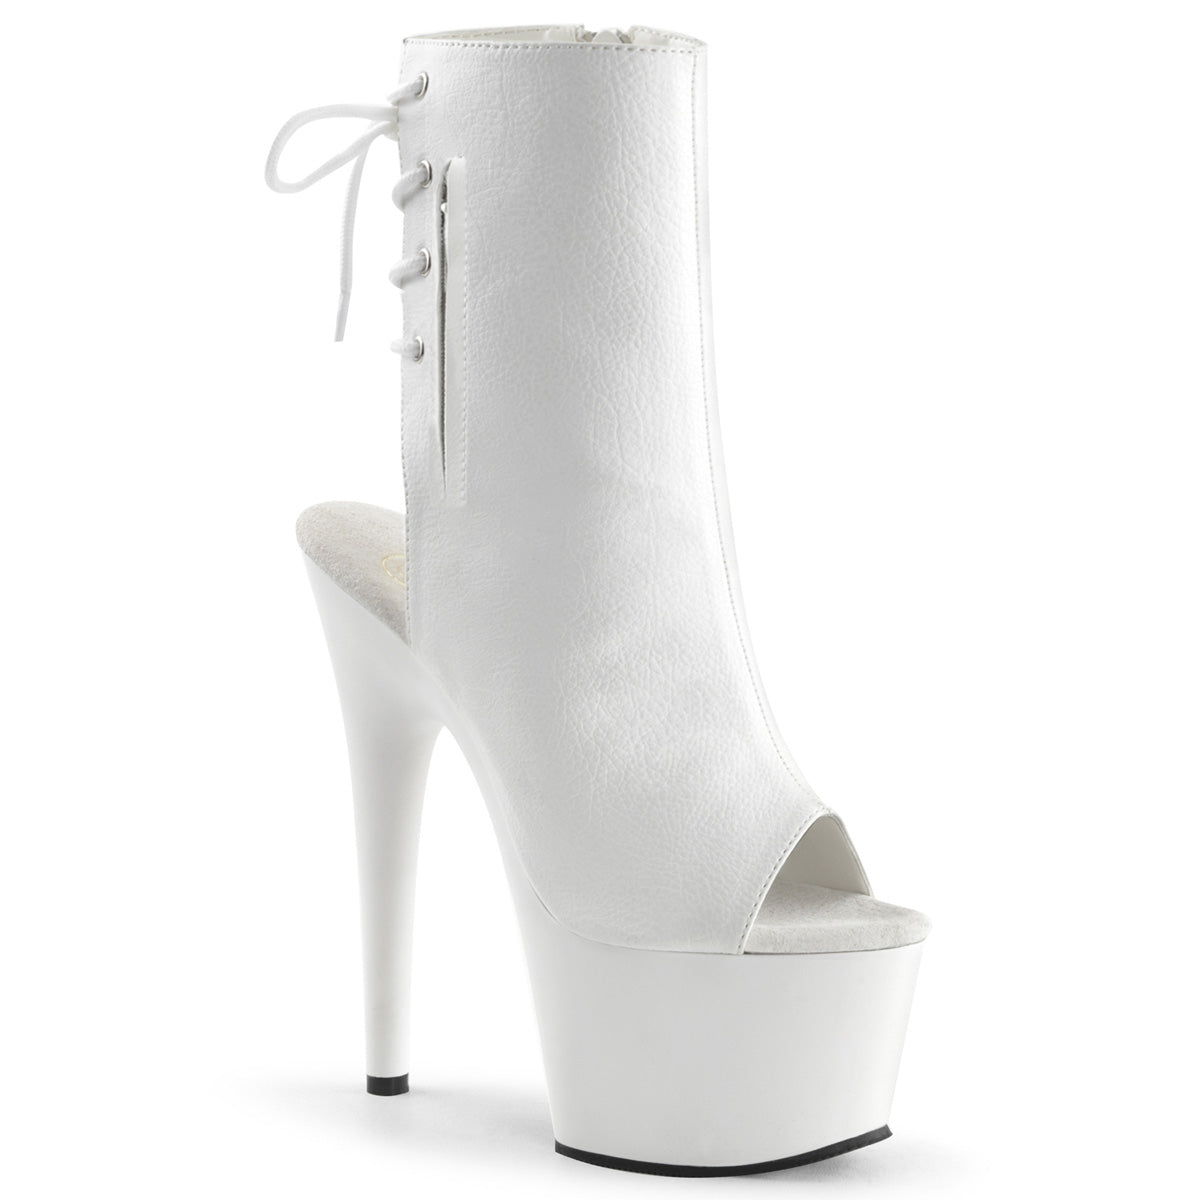 Pleaser Womens Ankle Boots ADORE-1018 Wht Faux Leather/Wht